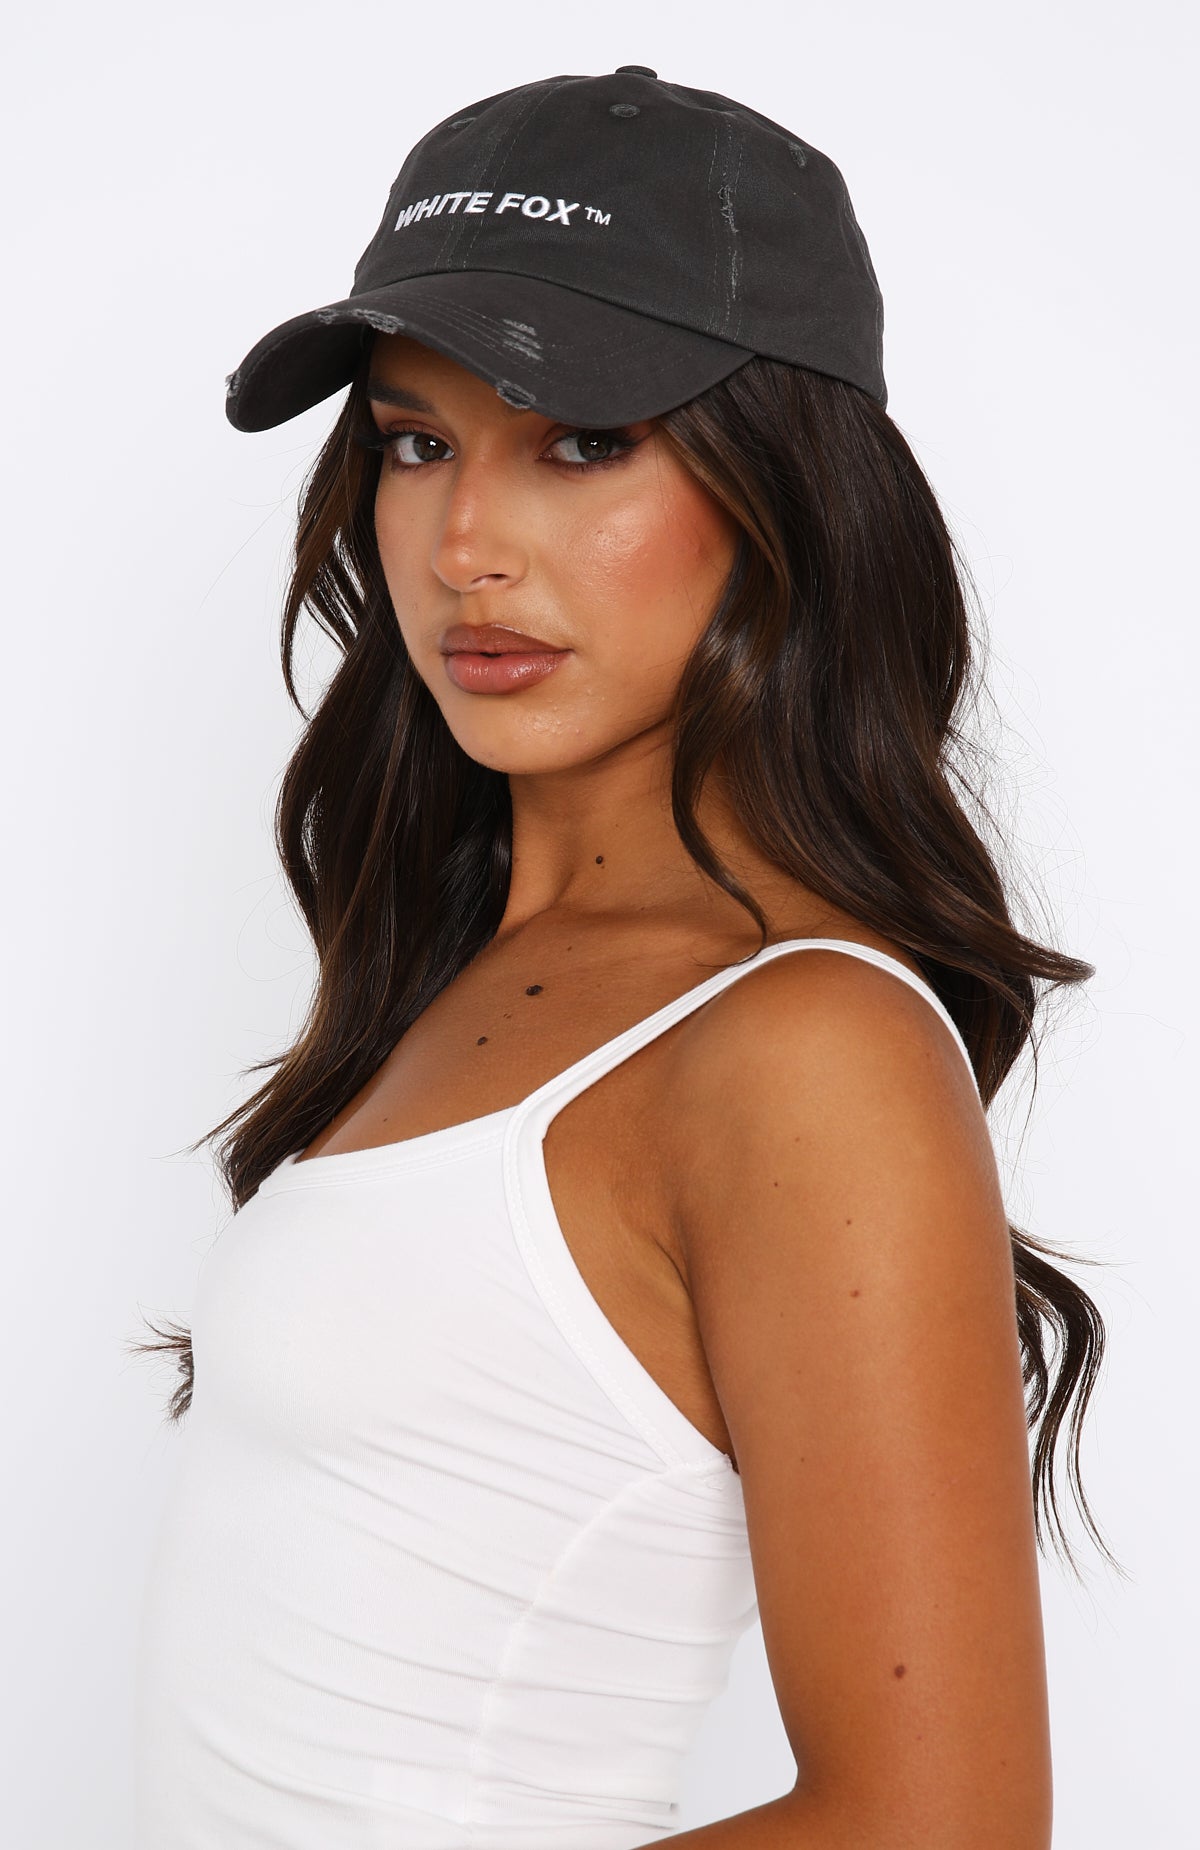 Turn My Way Cap Charcoal | White Fox Boutique